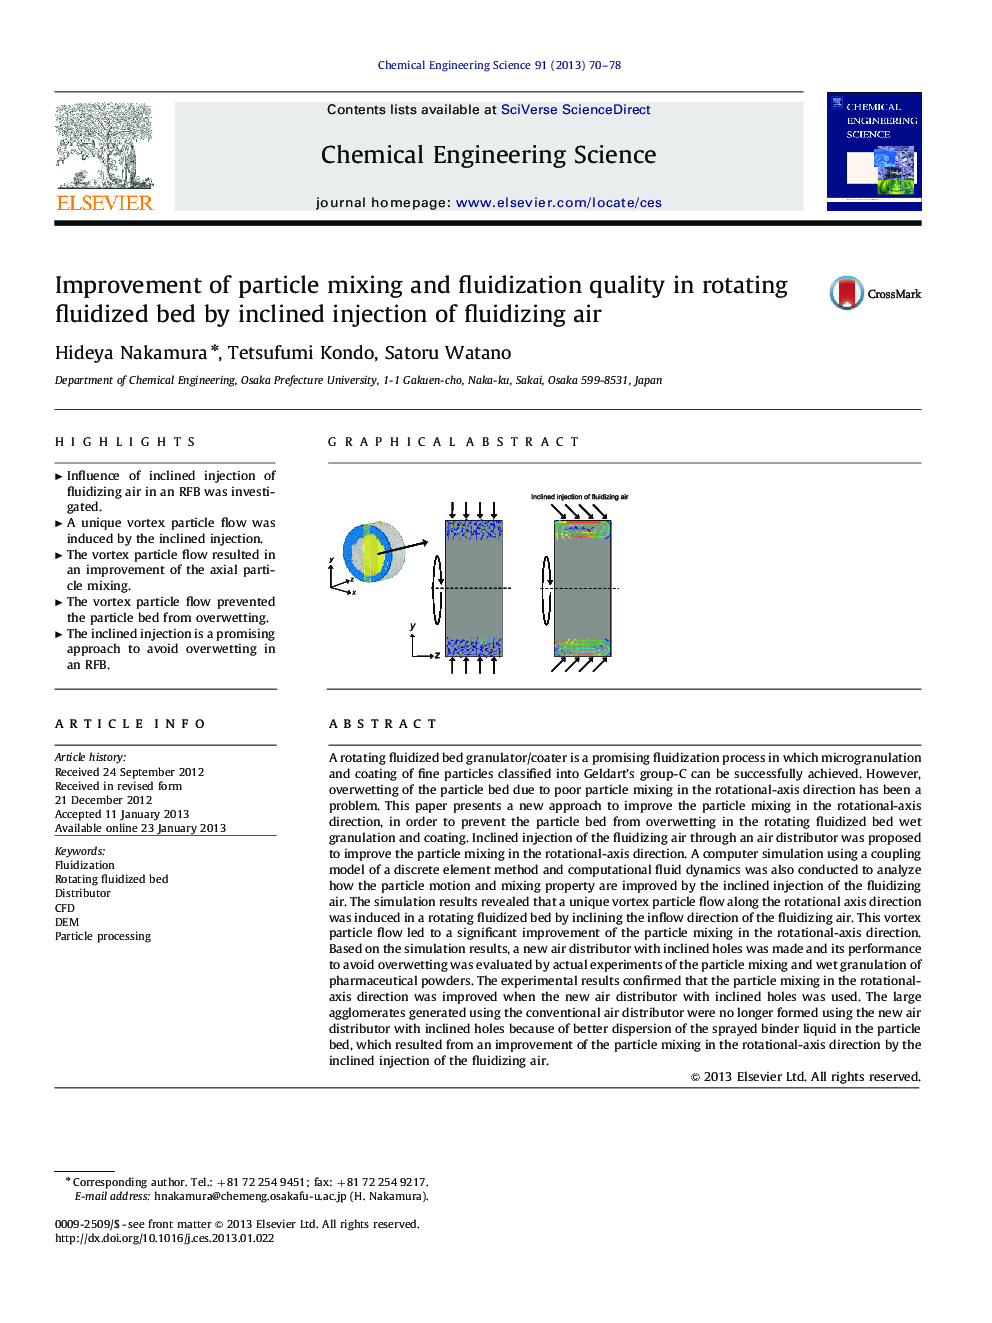 Improvement of particle mixing and fluidization quality in rotating fluidized bed by inclined injection of fluidizing air